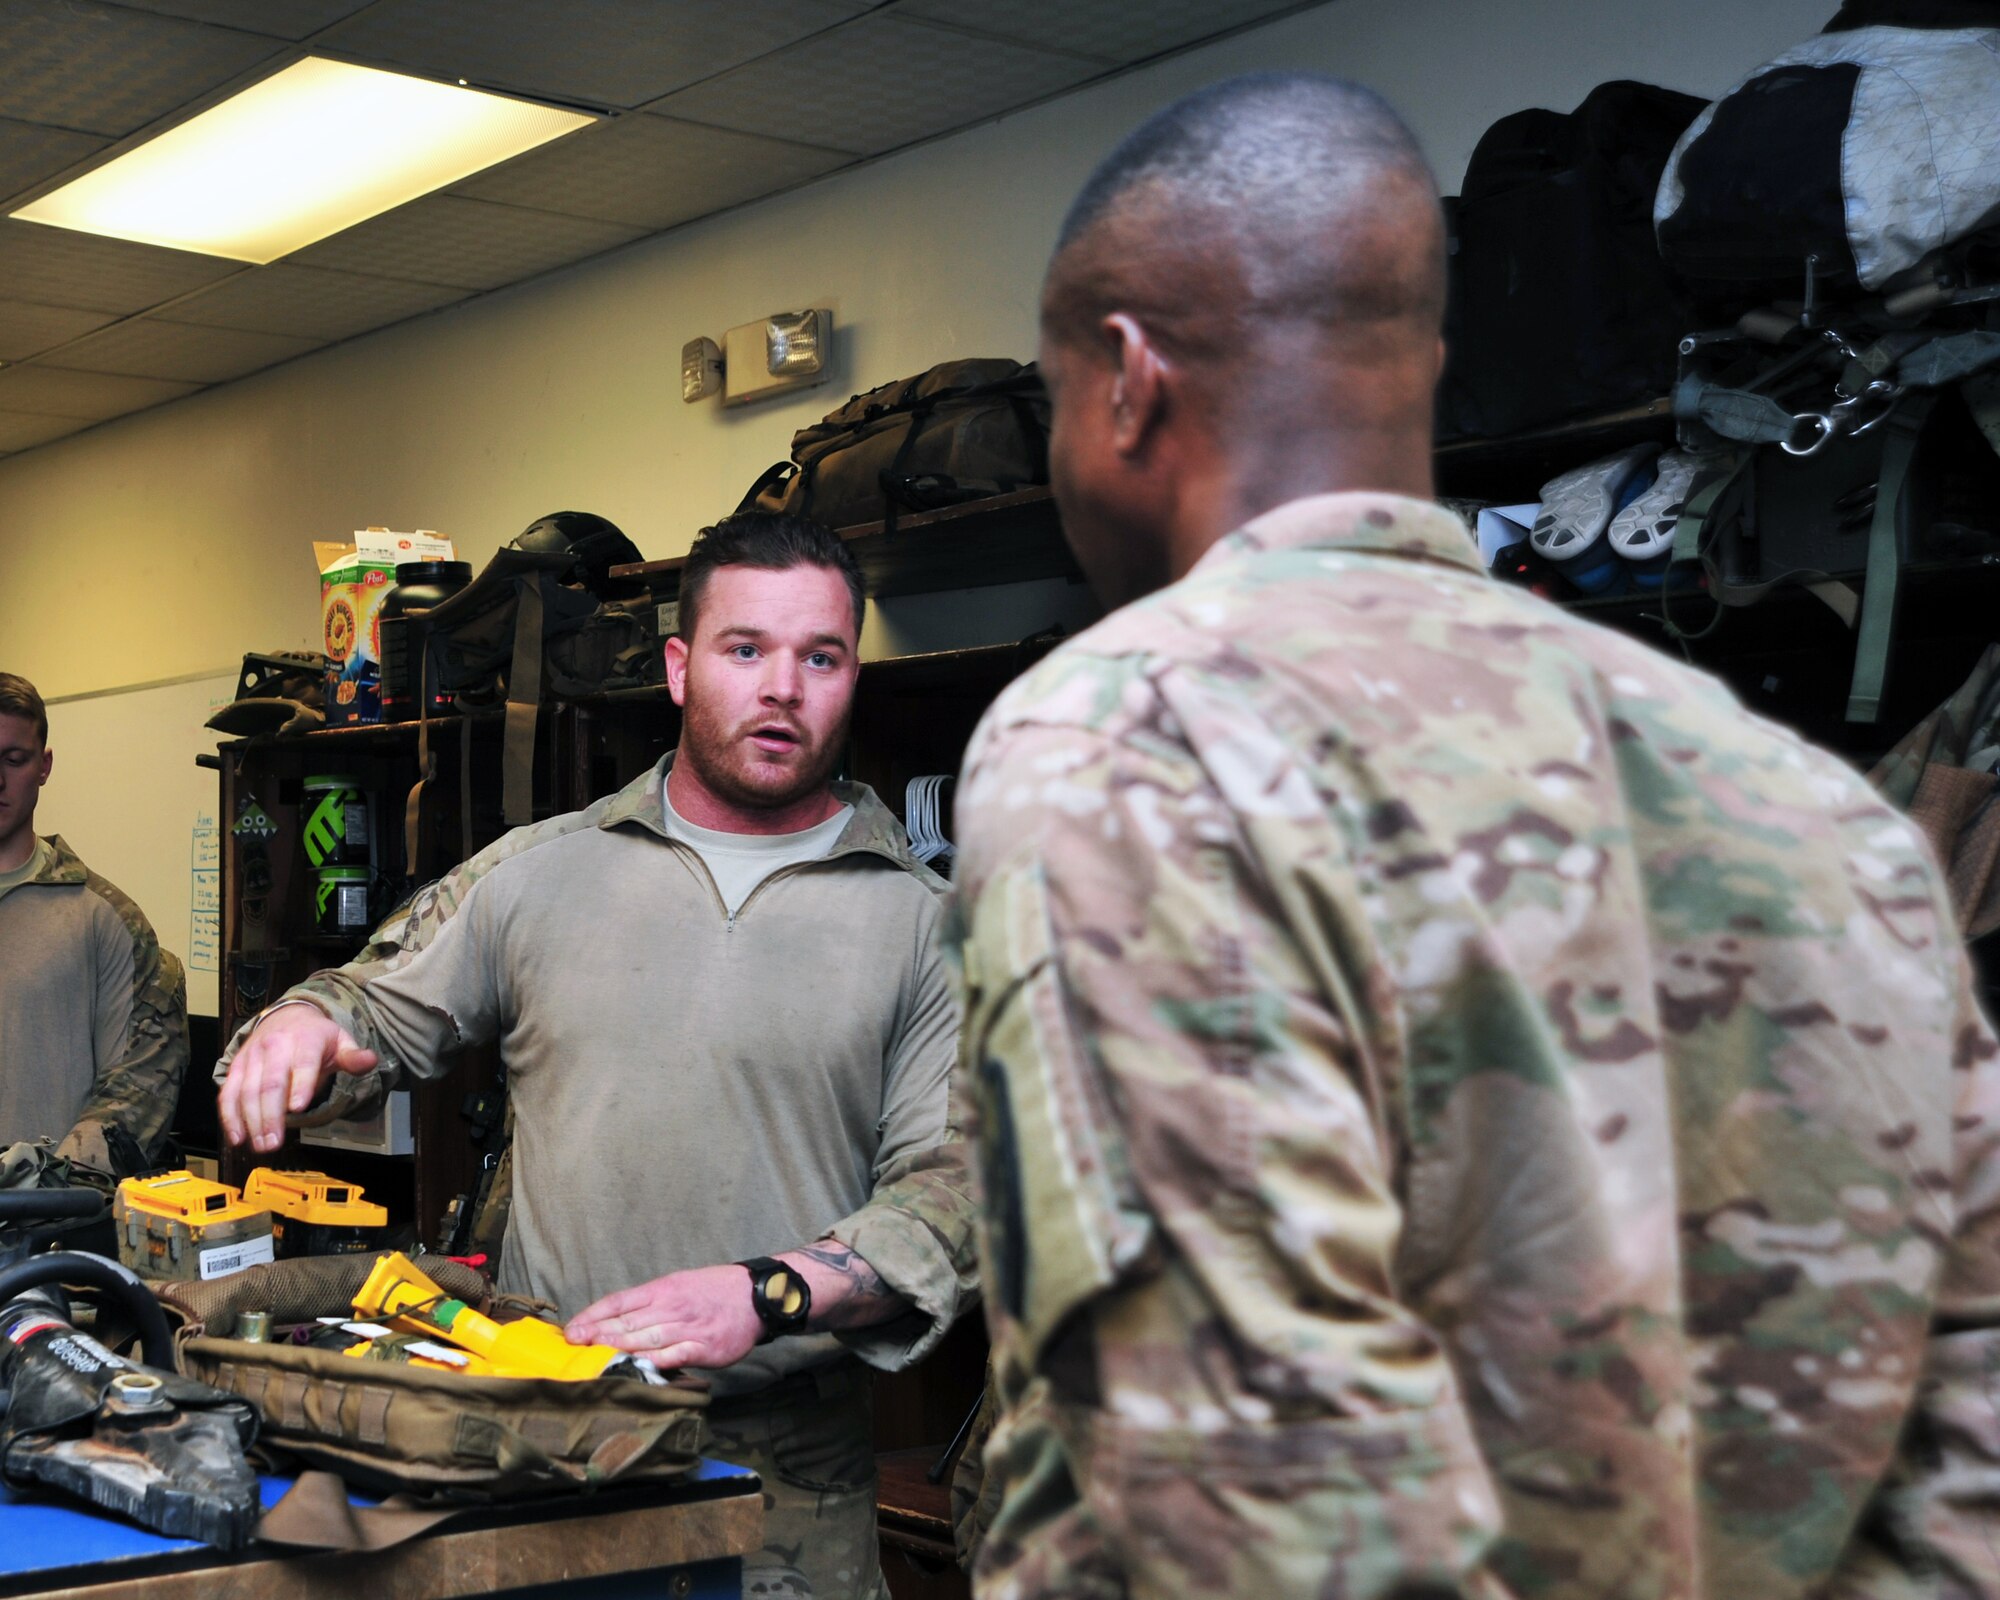 U.S. Air Force Staff Sgt. Kyle Holland, 83rd Expeditionary Rescue Squadron pararescue element leader, briefs U.S. Army Command Sgt. Maj. Christopher Gilpin, Combined Joint Task Force 3 United States Forces Afghanistan, during a tour Jan. 6, 2015 at Bagram Airfield, Afghanistan. During the tour, Gilpin had the opportunity to meet with 455th Air Expeditionary Wing leadership and become better acquainted with Air Force assets and squadrons. (U.S. Air Force photo by Staff Sgt. Whitney Amstutz/released)